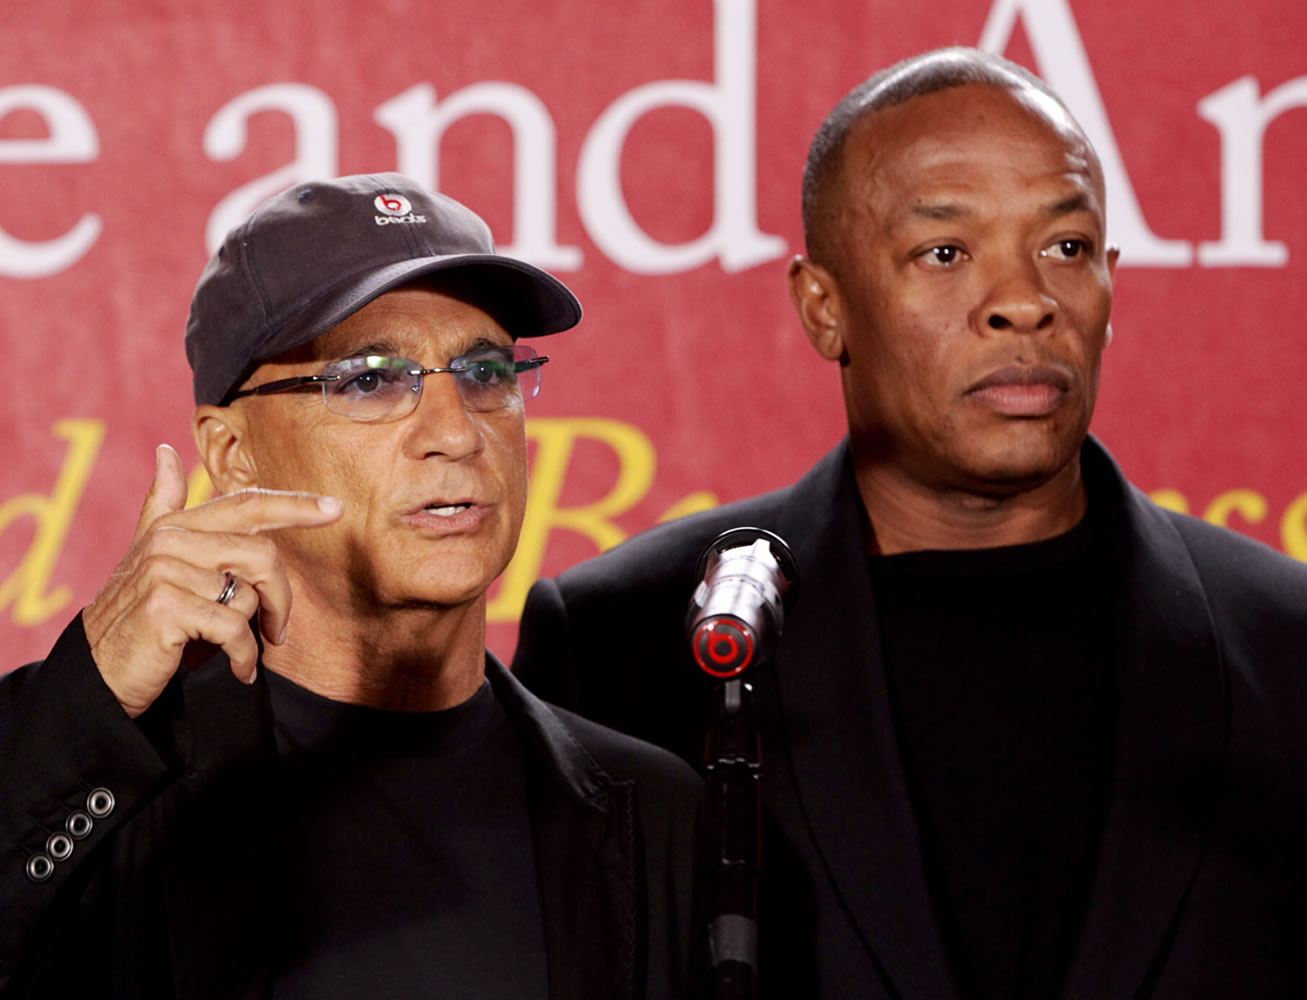 Interscope Records and Beats Electronics co-founder Jimmy Iovine, left, with hip-hop mogul and Beats Electronics co-founder Dr. Dre, as they announce May 15, 2013 a $70 million dollar donation to create the new &quot;Jimmy Iovine and Andre Young Academy for Arts and Technology and Business Innovation,&quot; during a news conference at in Santa Monica, Calif. Apple announced May 28 that it will acquire Beats Electronics and its music service, Beats Music, for $3 billion.